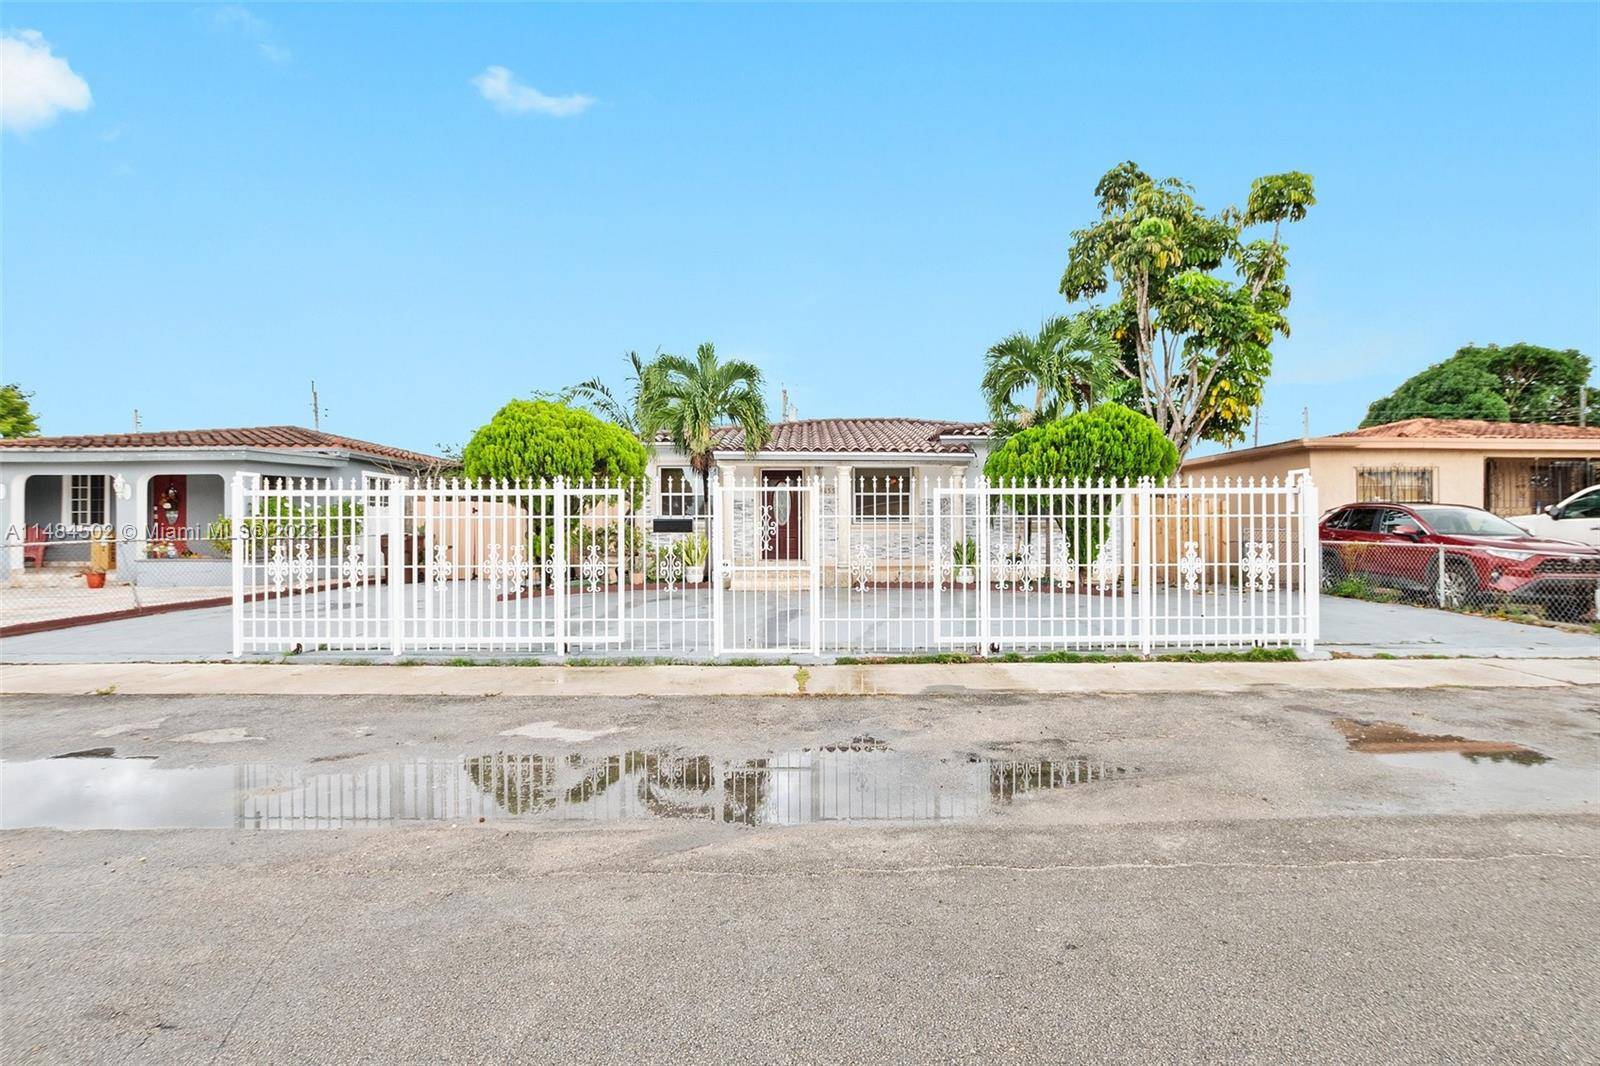 Single Family Home In the Hearth of Miami 4 Bed 4 bath 2533 S F Home is Larger than Public Records The location is perfect, the neighborhood within Miami Airport, ...